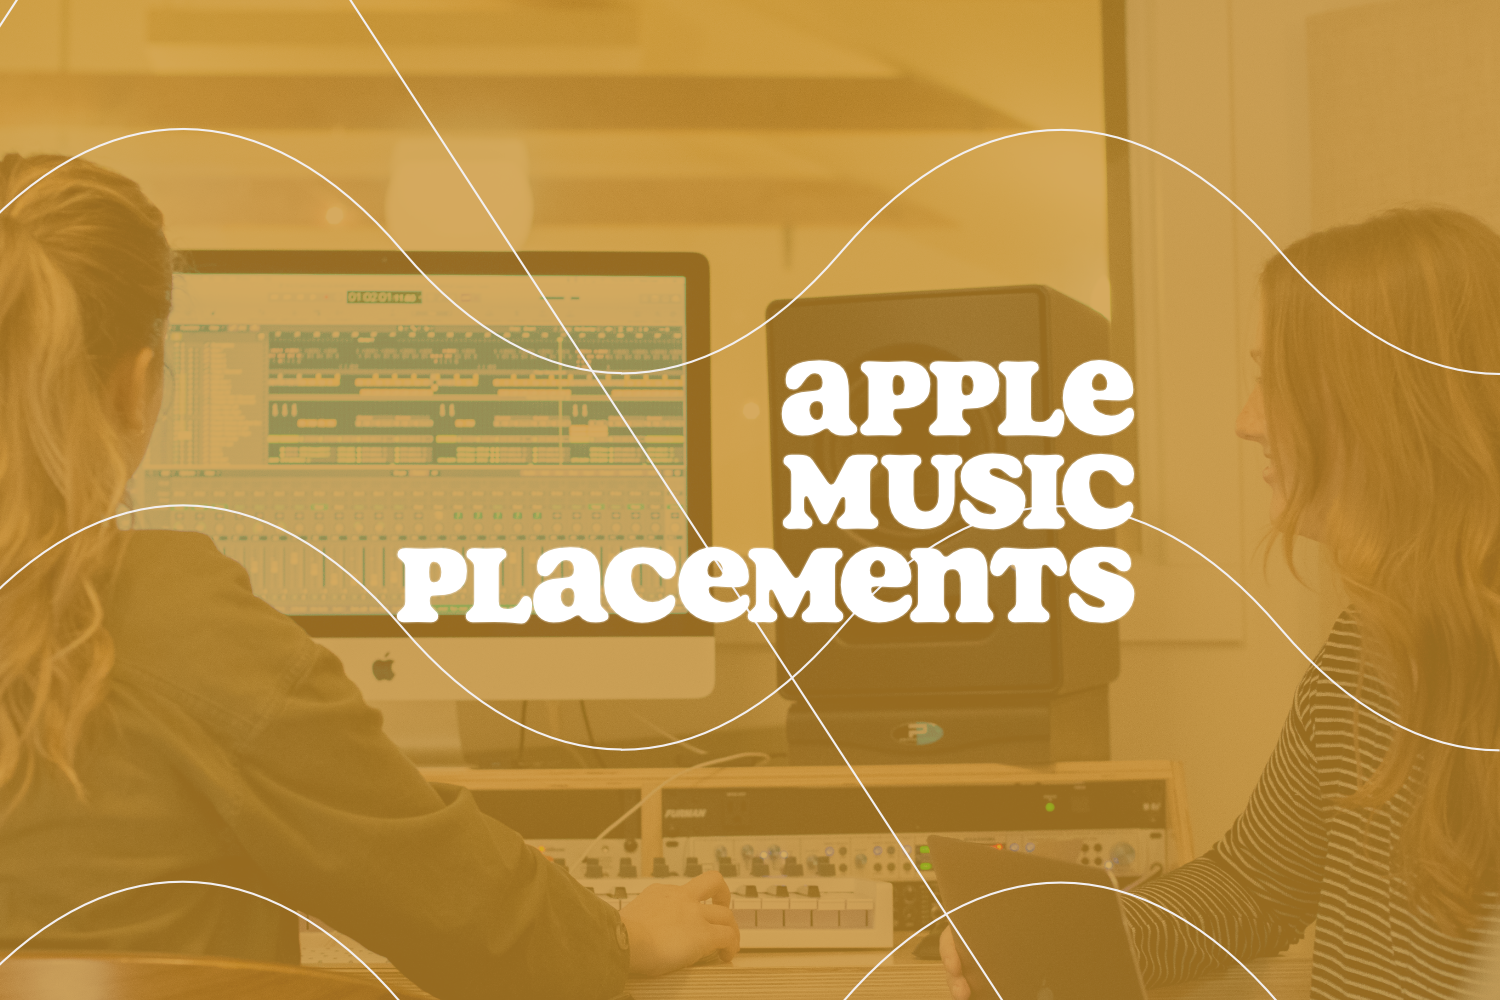 Marmoset team works soon music placement project for Apple